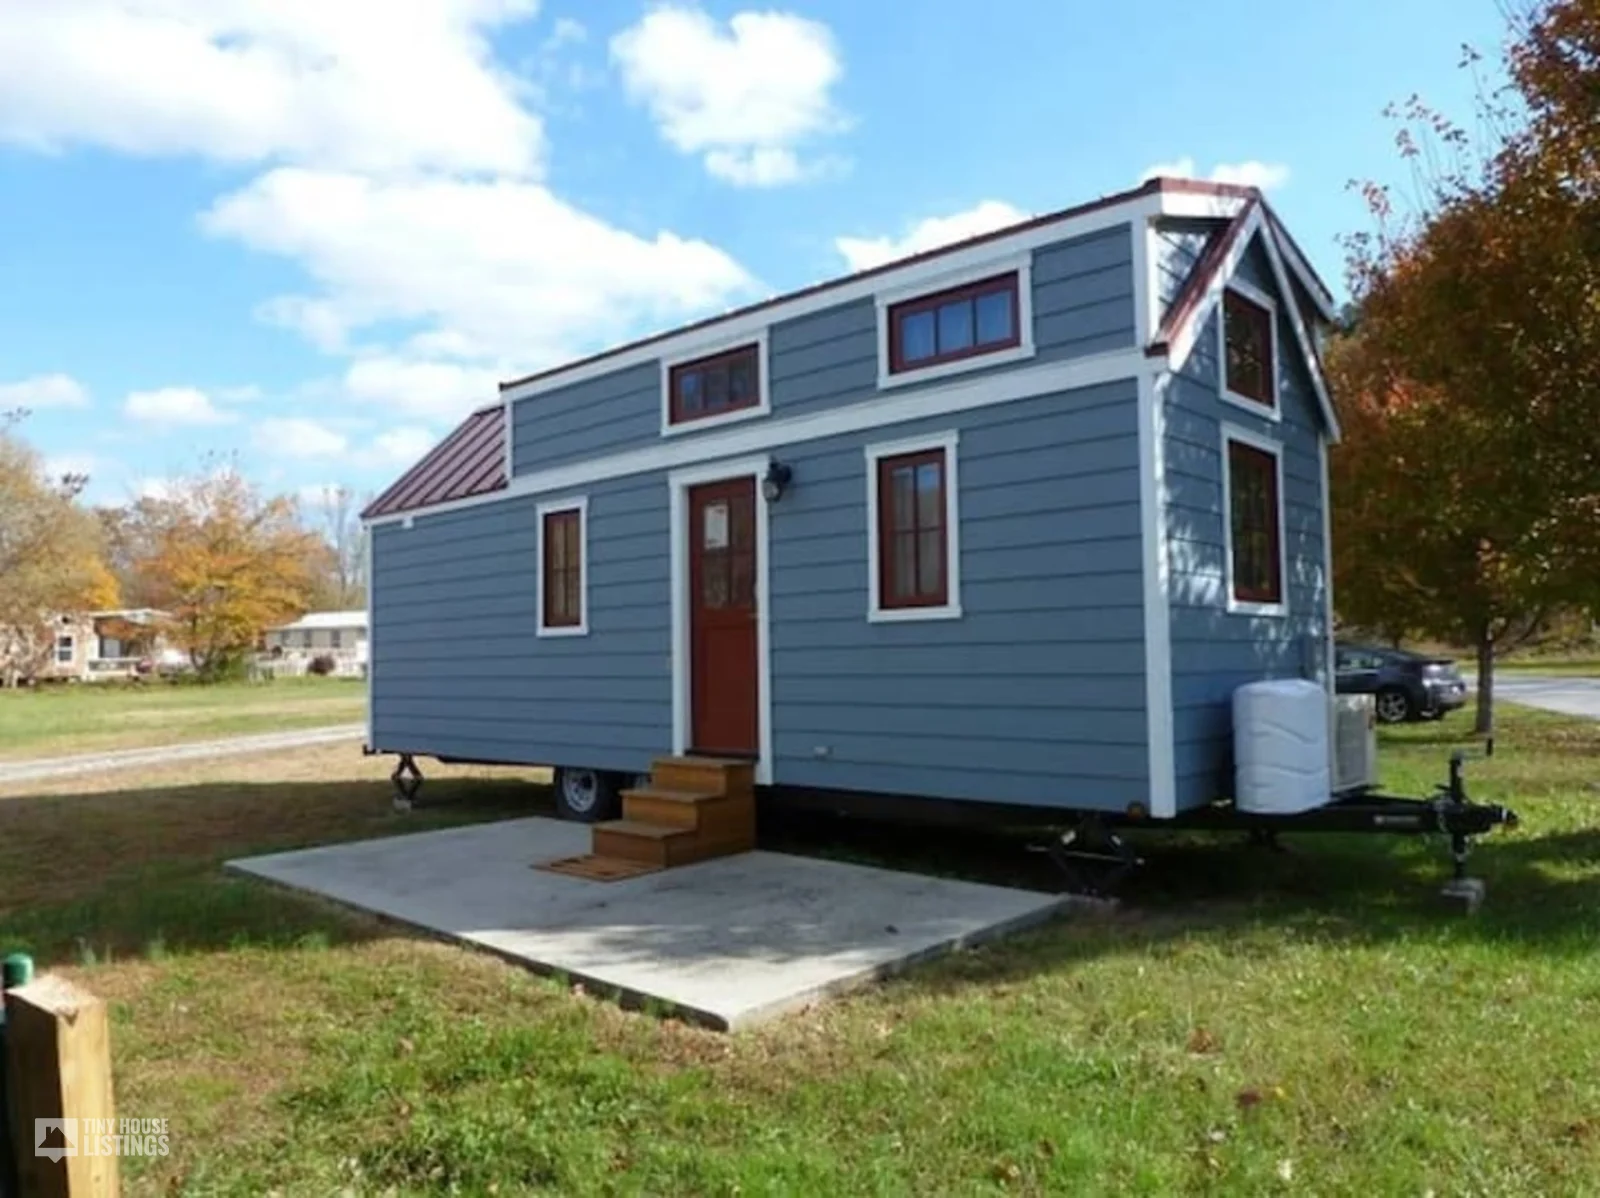 Blue Mobile tiny home on wheels